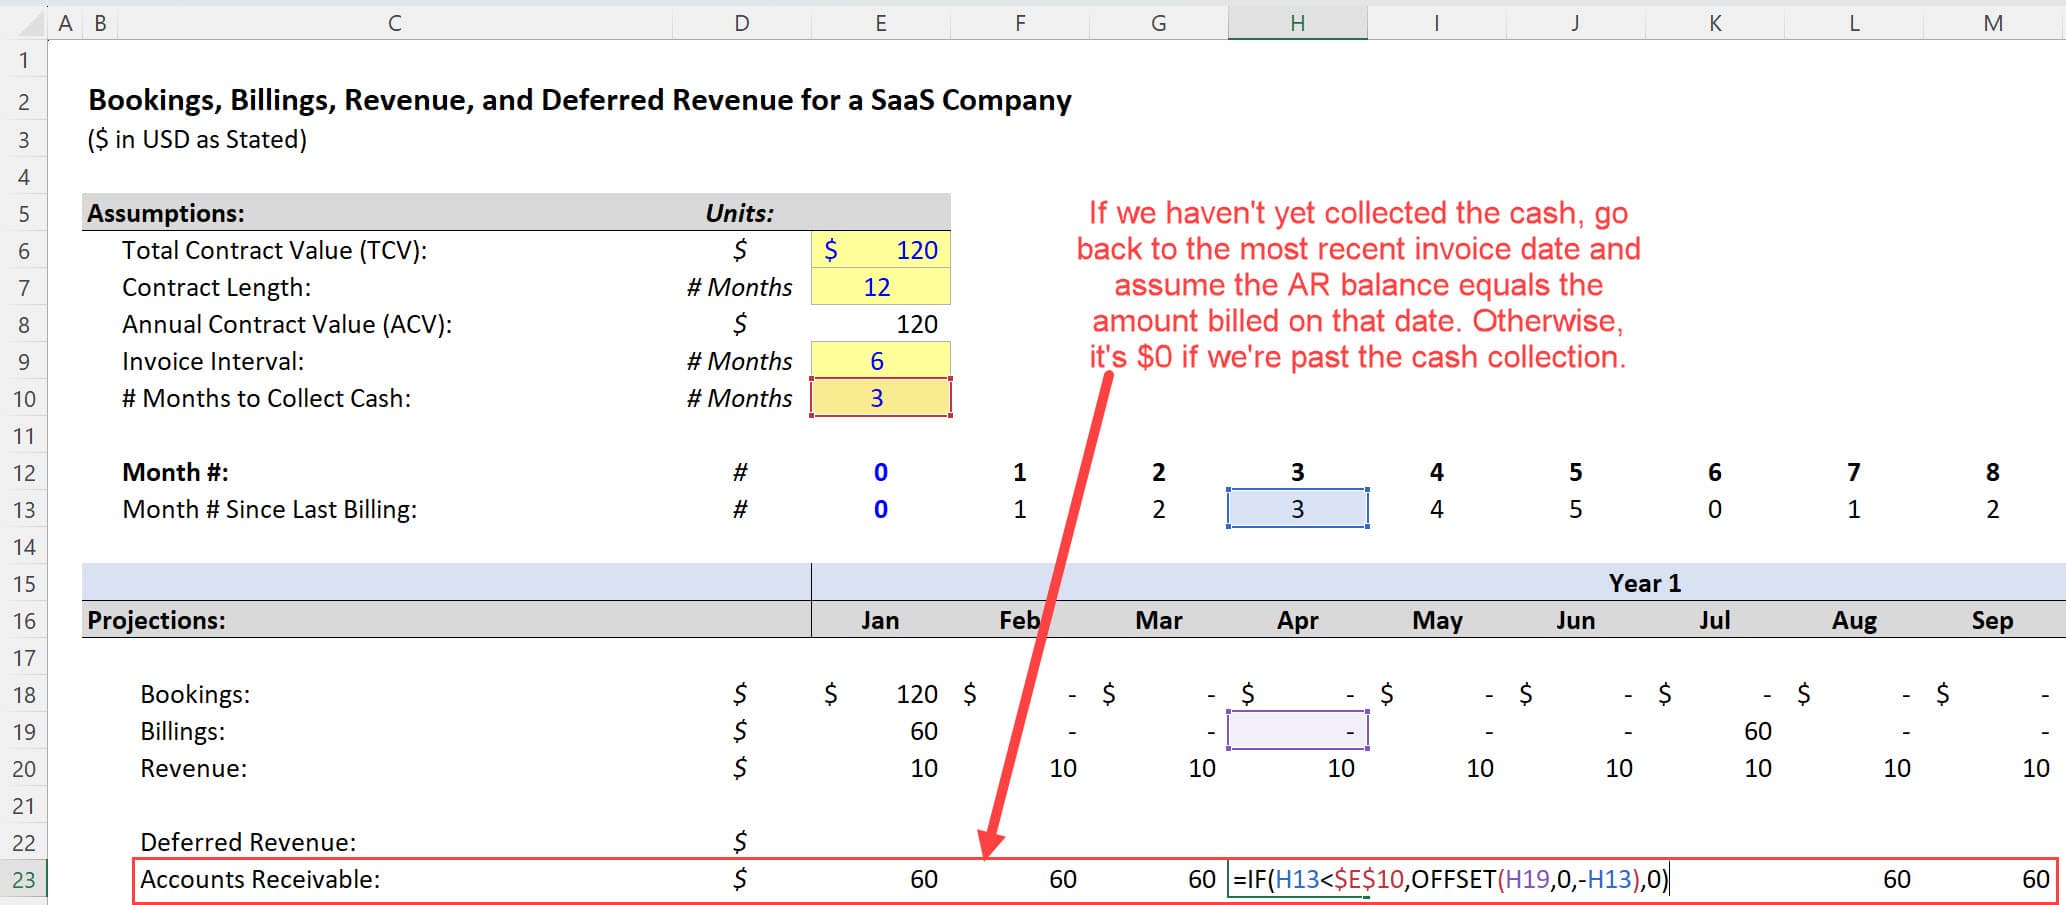 SaaS Accounting: Accounts Receivable Changes